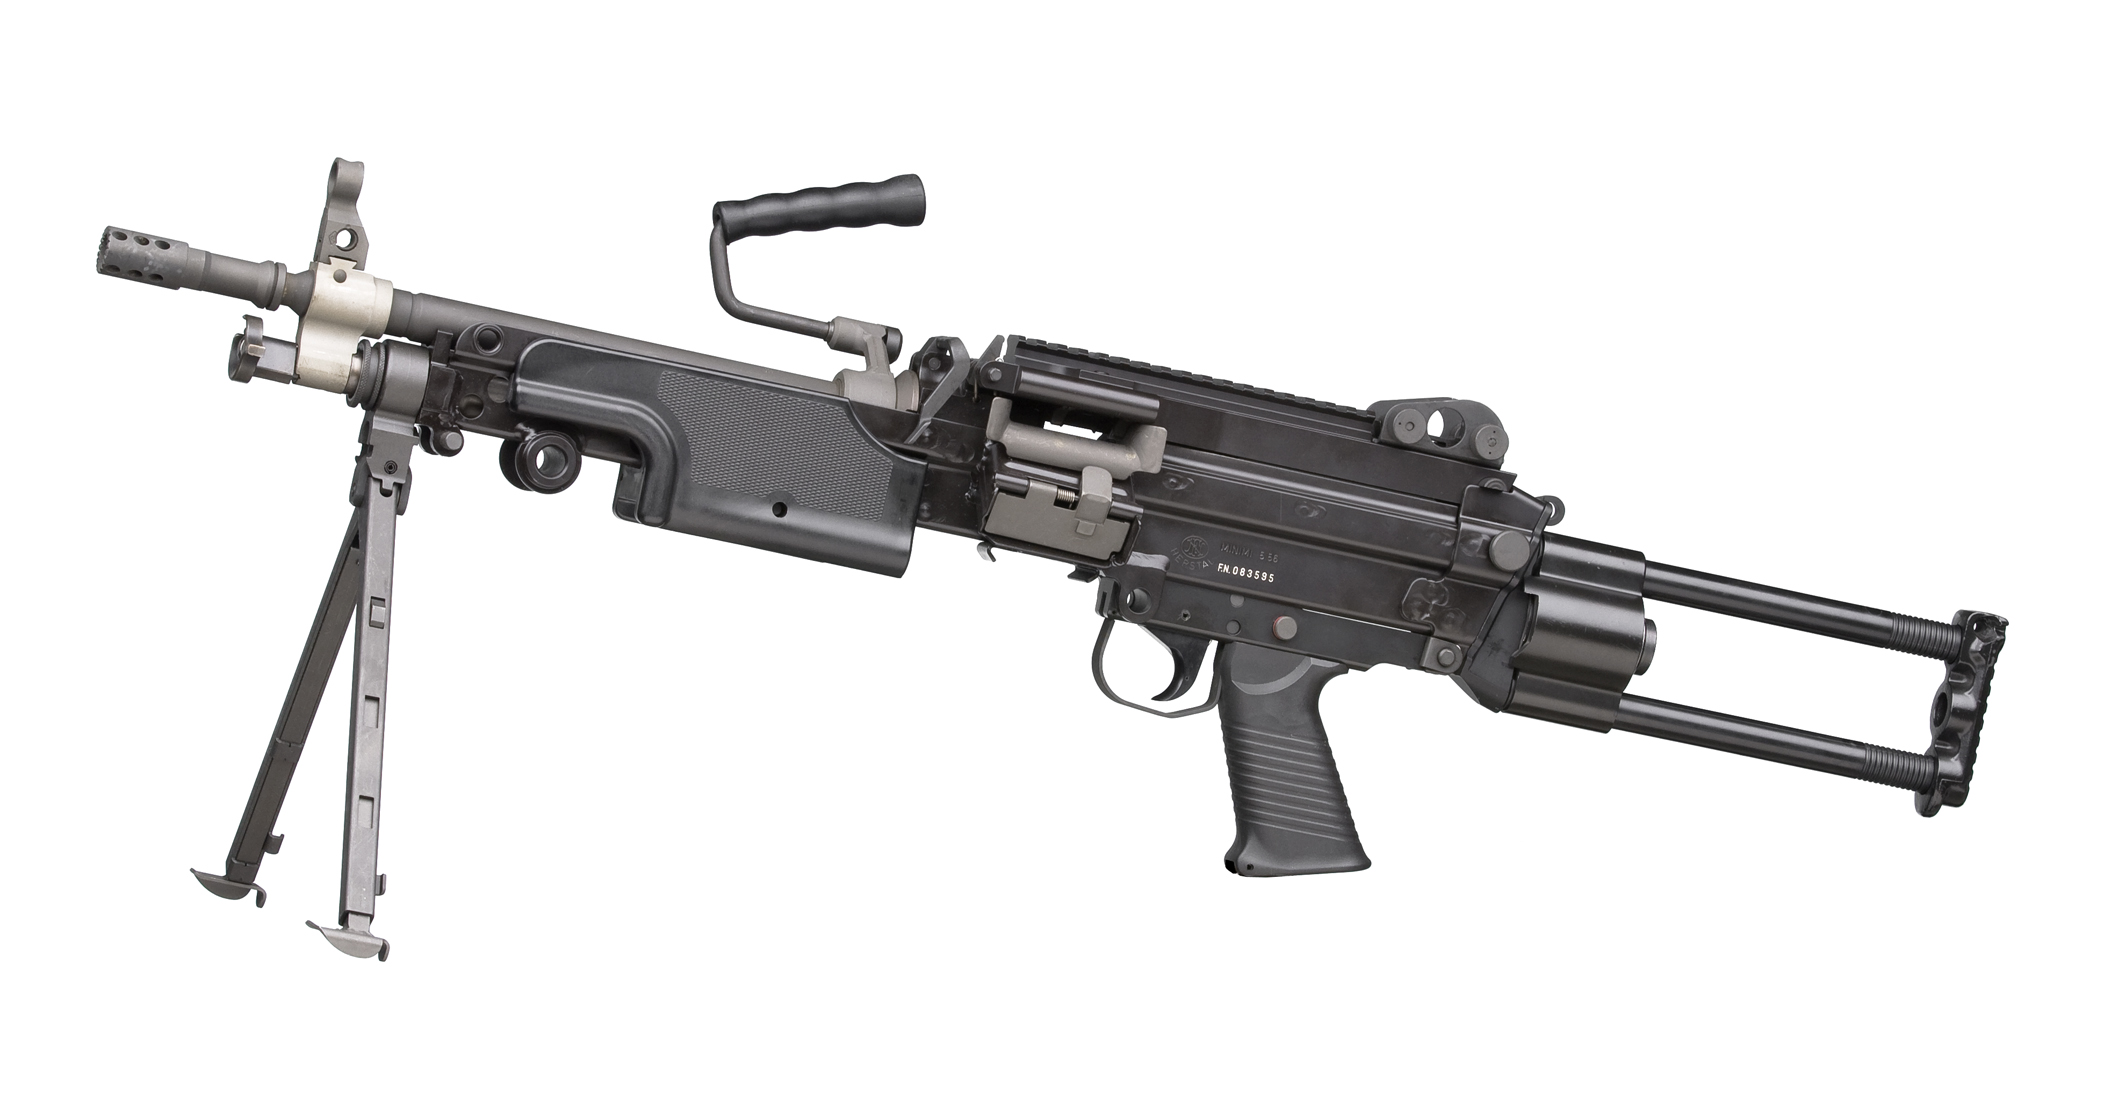 the m15e2 is an arg version that has been designed to be used in